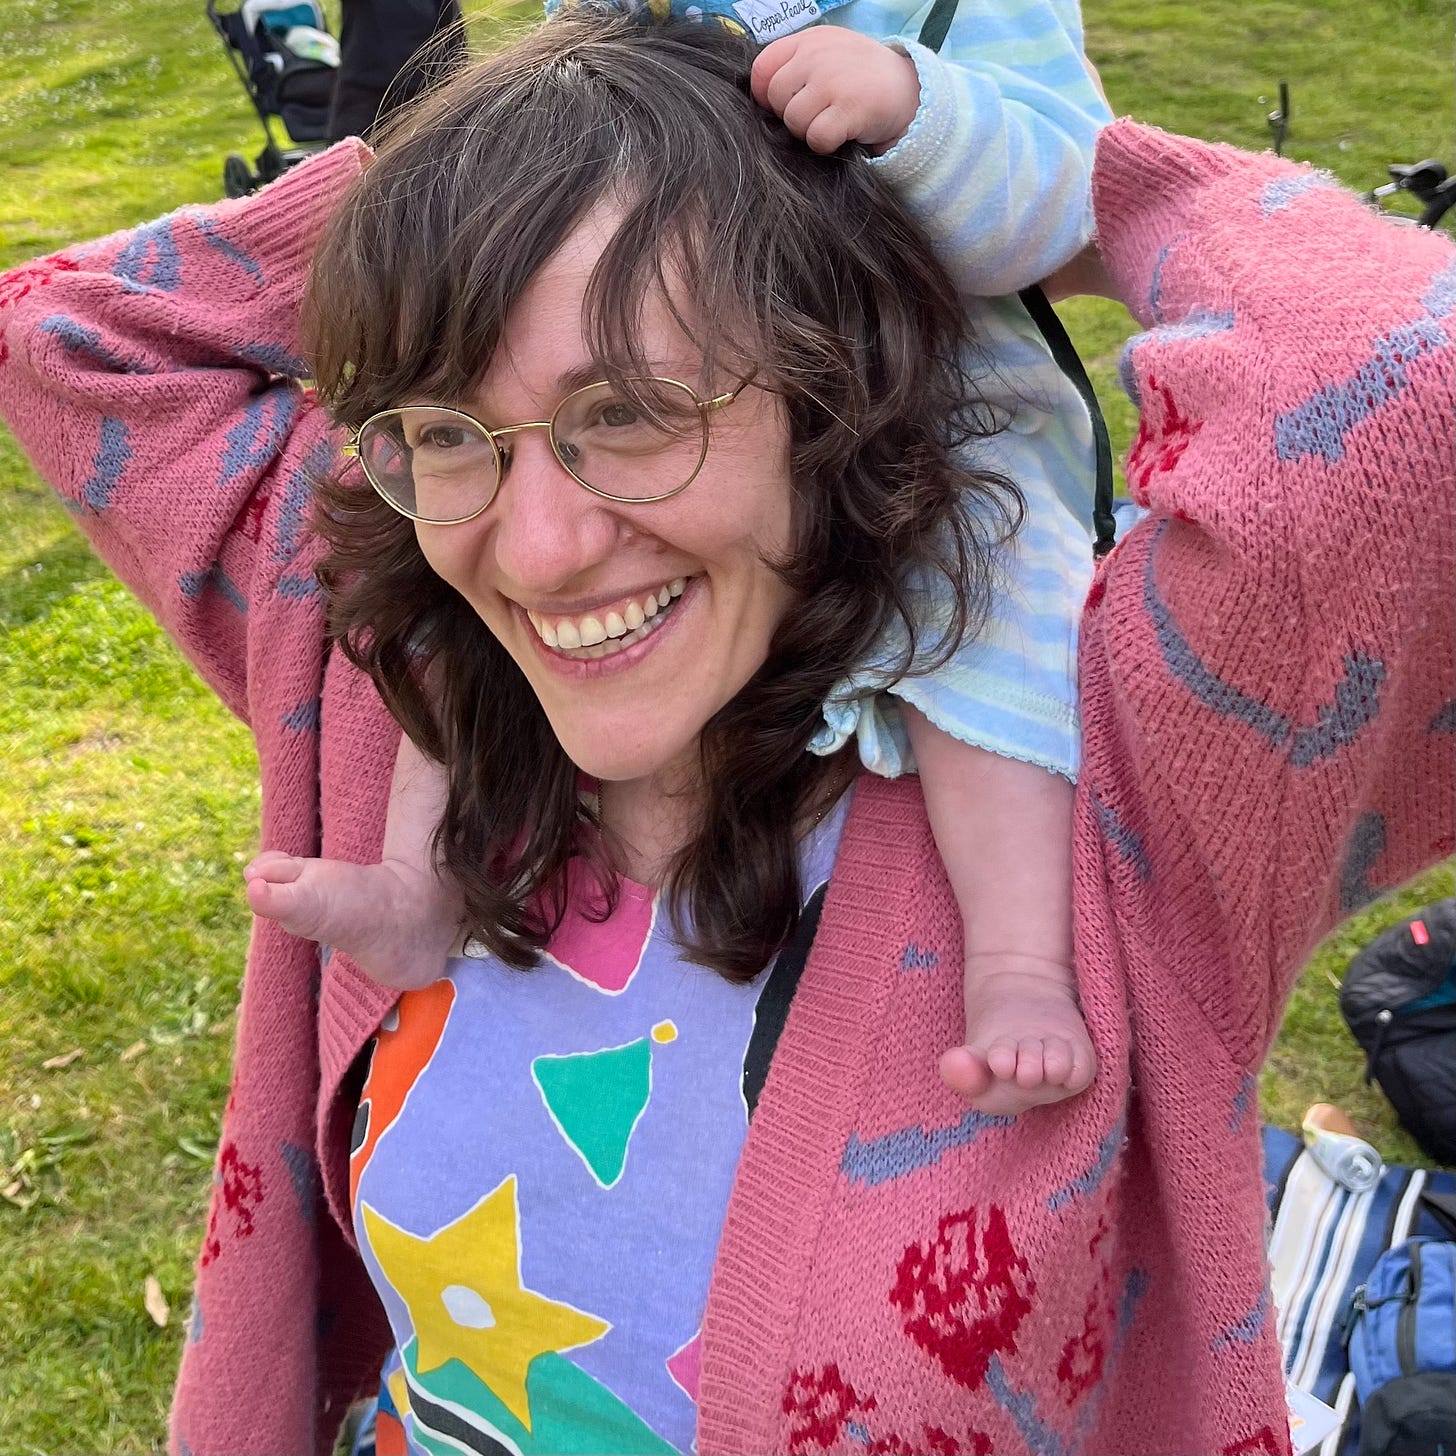 Amy is wearing a purple shirt with colorful shapes and a pink cardigan with roses on it. She's holding her baby on her shoulders and her baby is holding onto her hair like the reins of a horse. Her baby's cute little feet are bare.